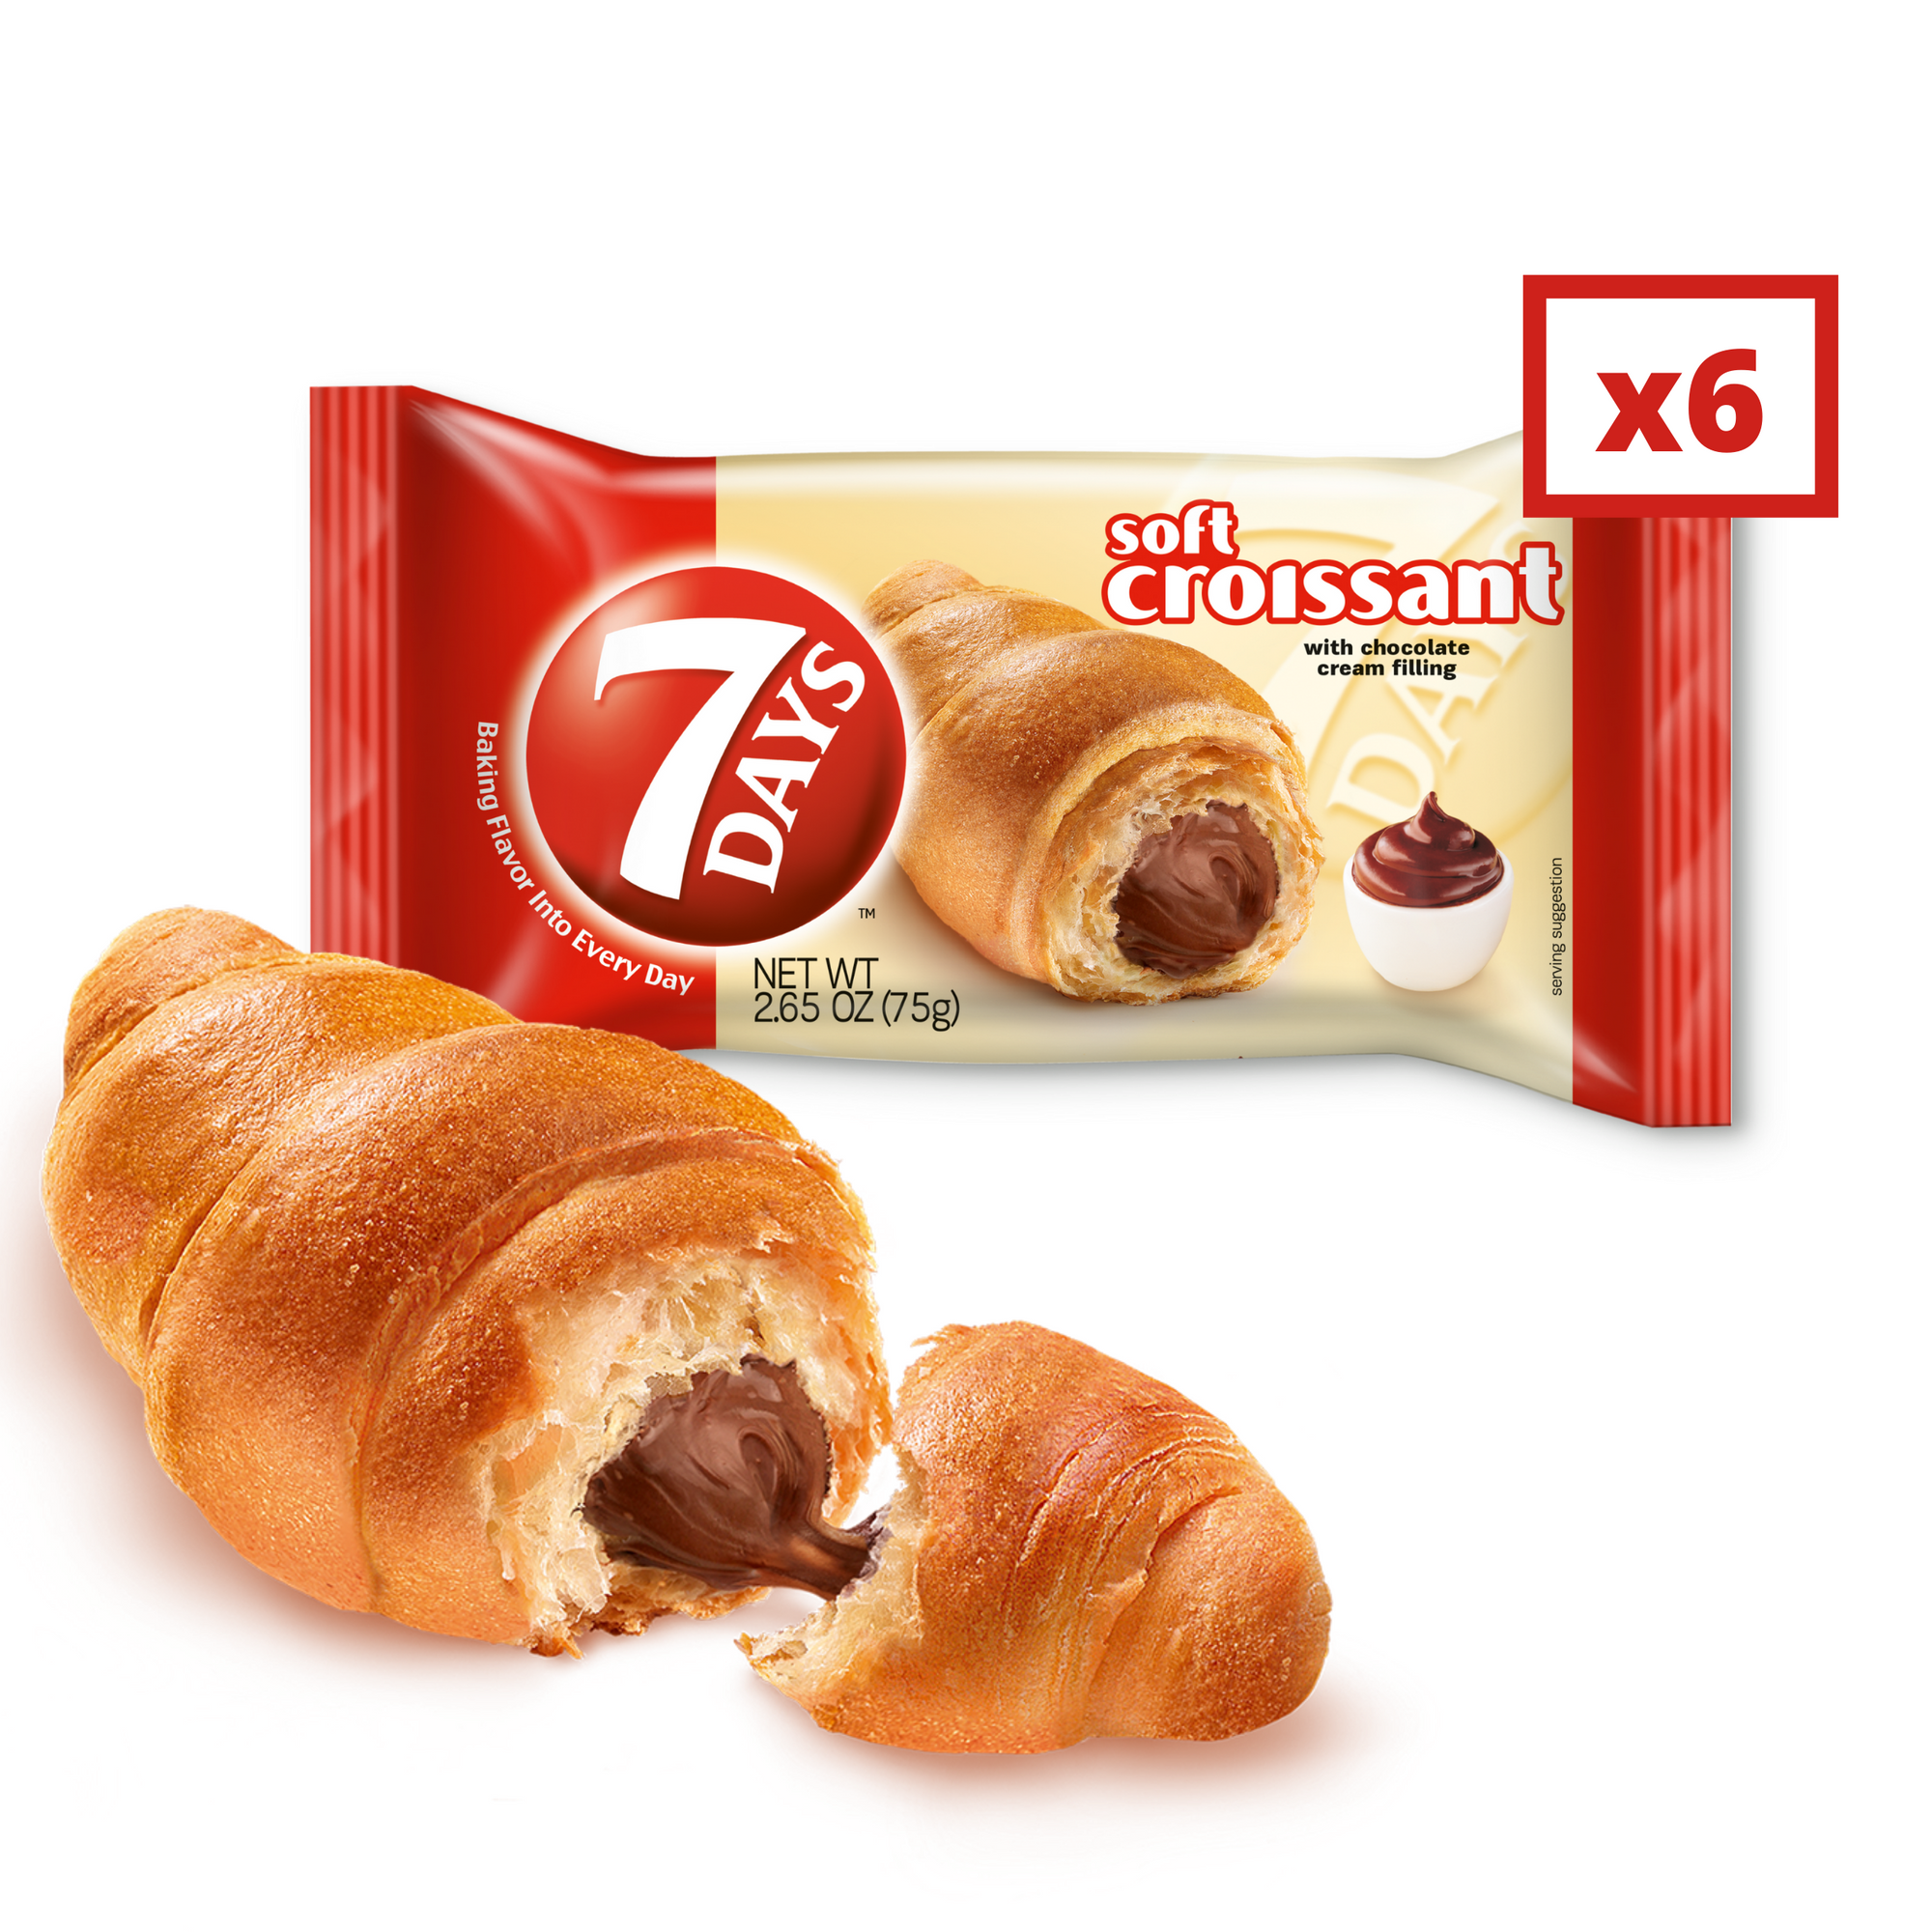 bundle pack with mini croissants, bagel chips, cake bars, and soft croissants